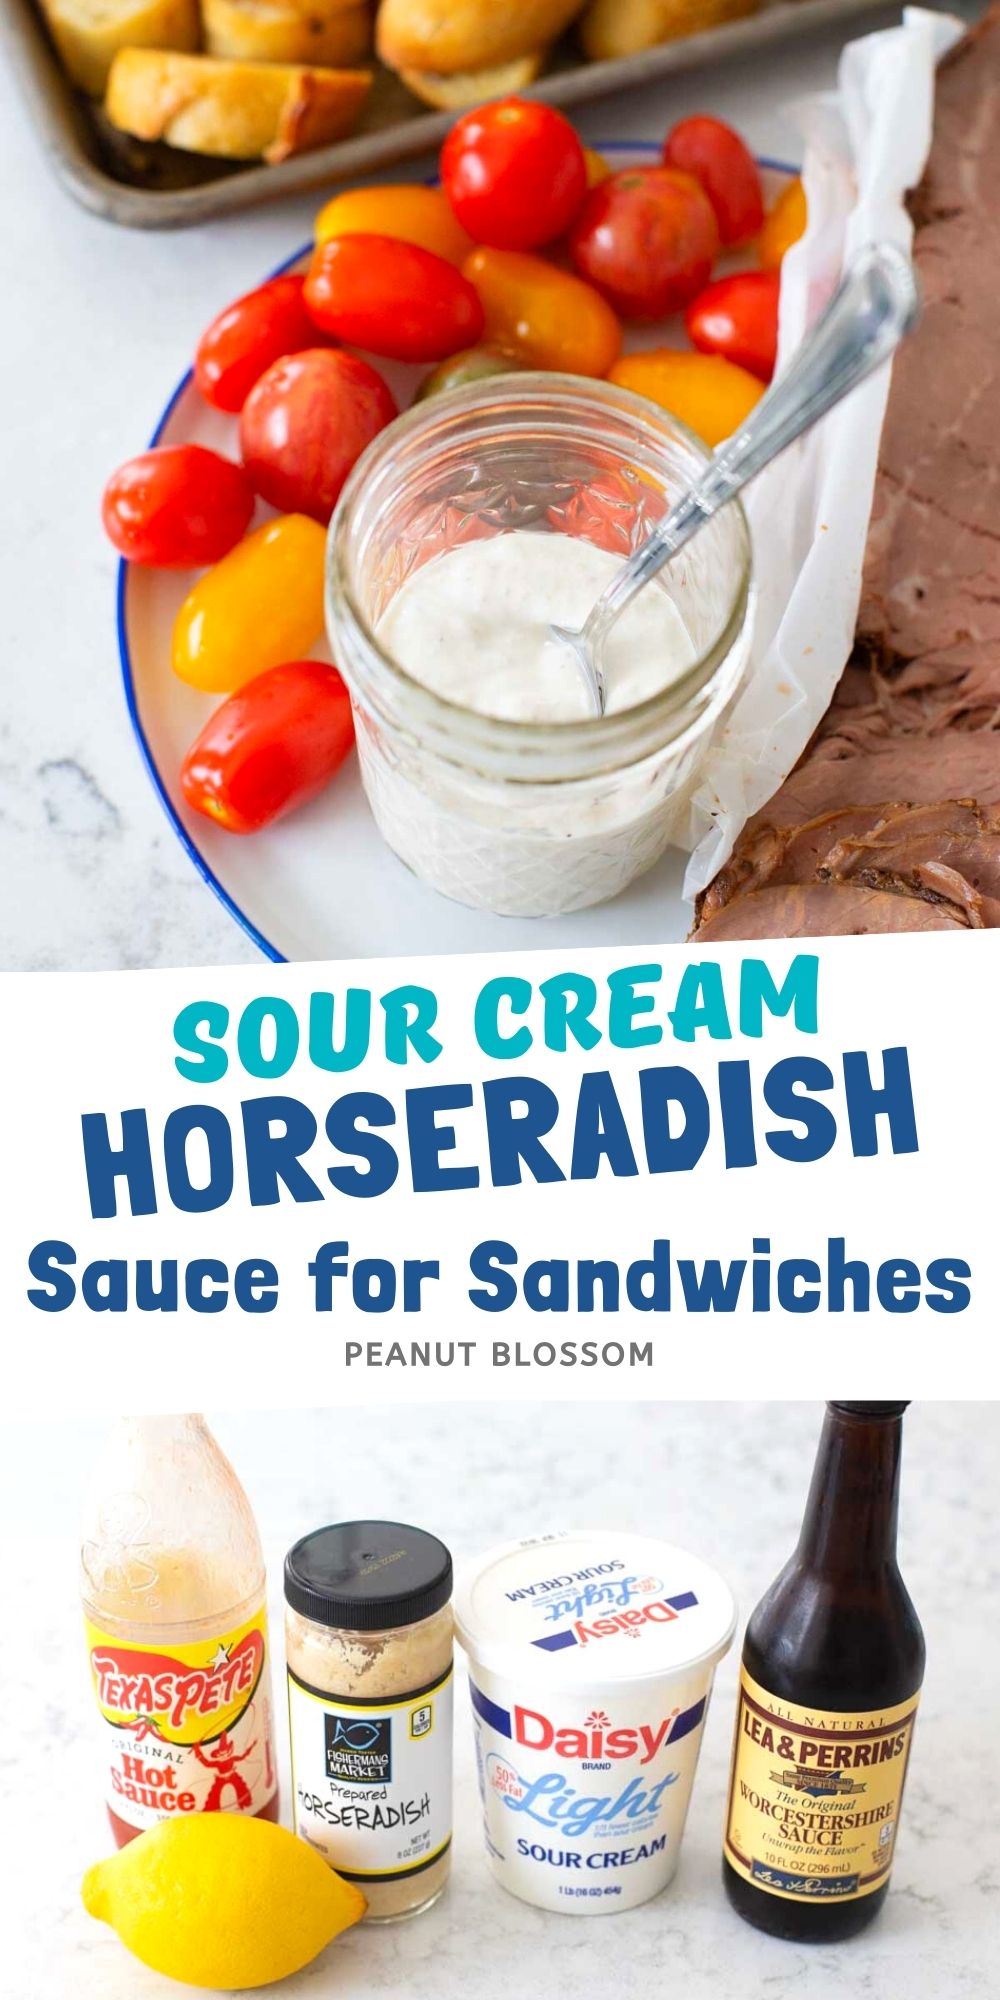 A jar of homemade horseradish sauce is on a platter with tomatoes and beef. The ingredients are in another photo in the collage.